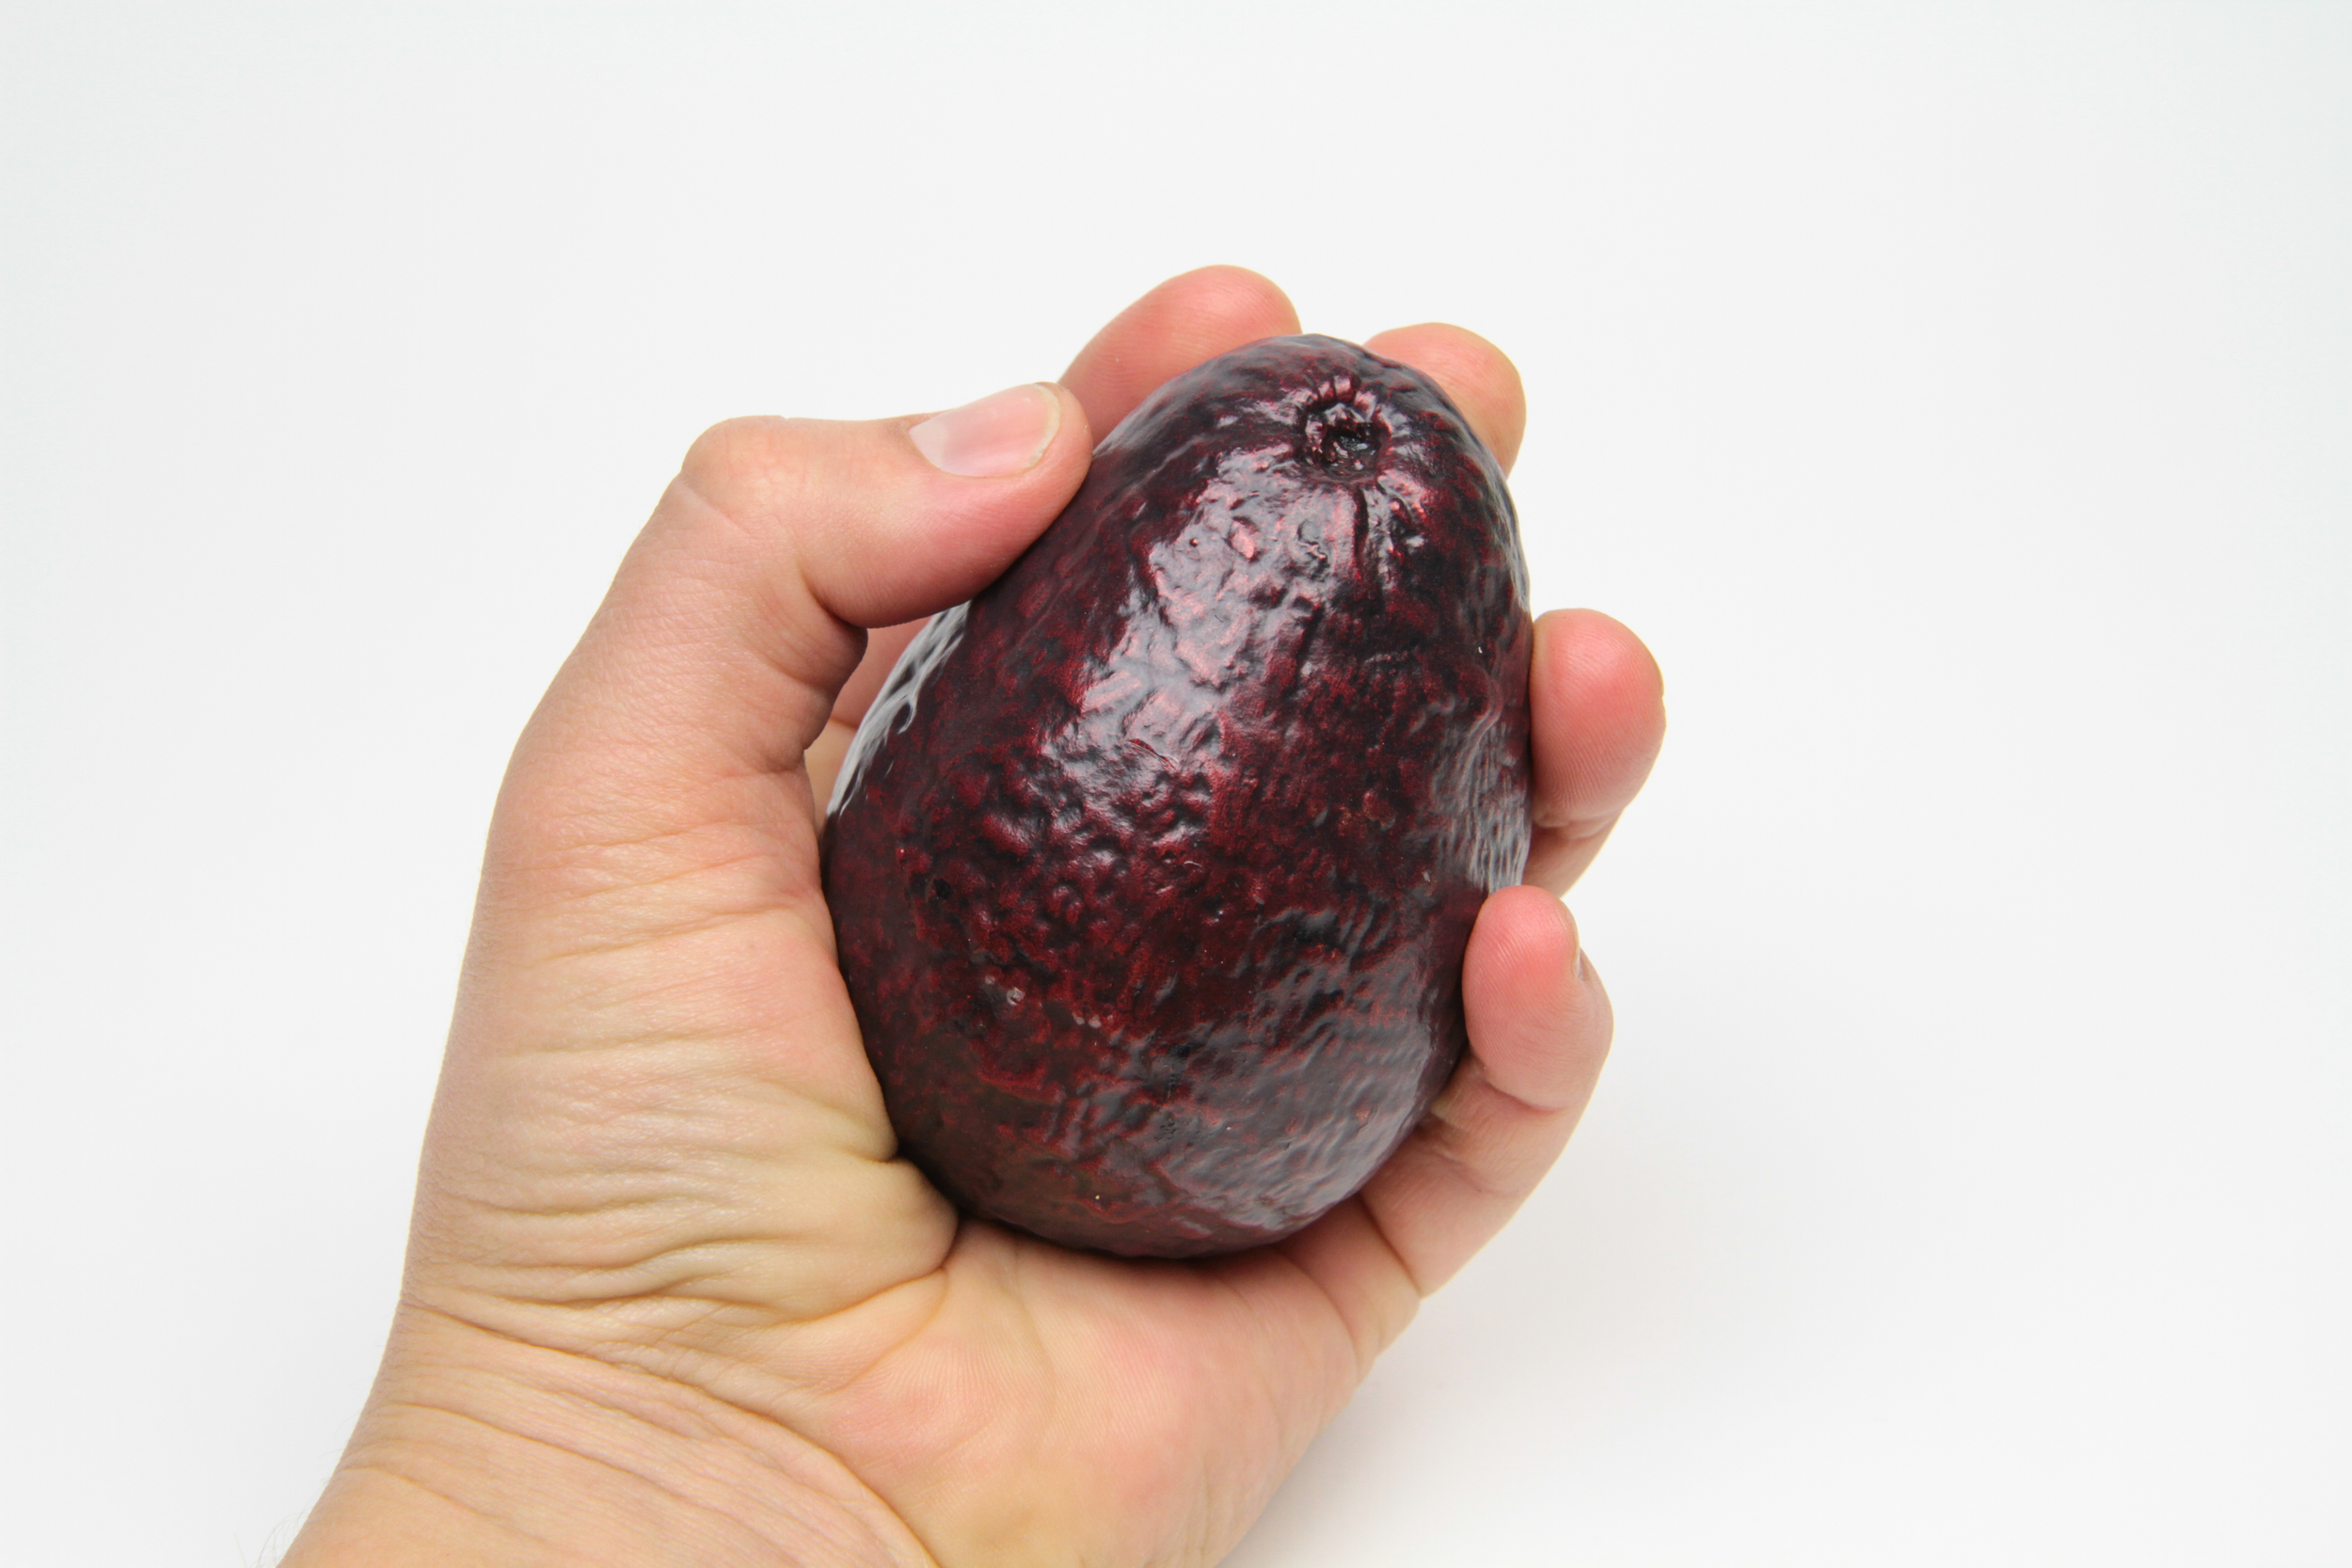   Aguacate Sangre  2016 Unique cast bronze (cast of imported Mexican avocado) Dimensions variable   